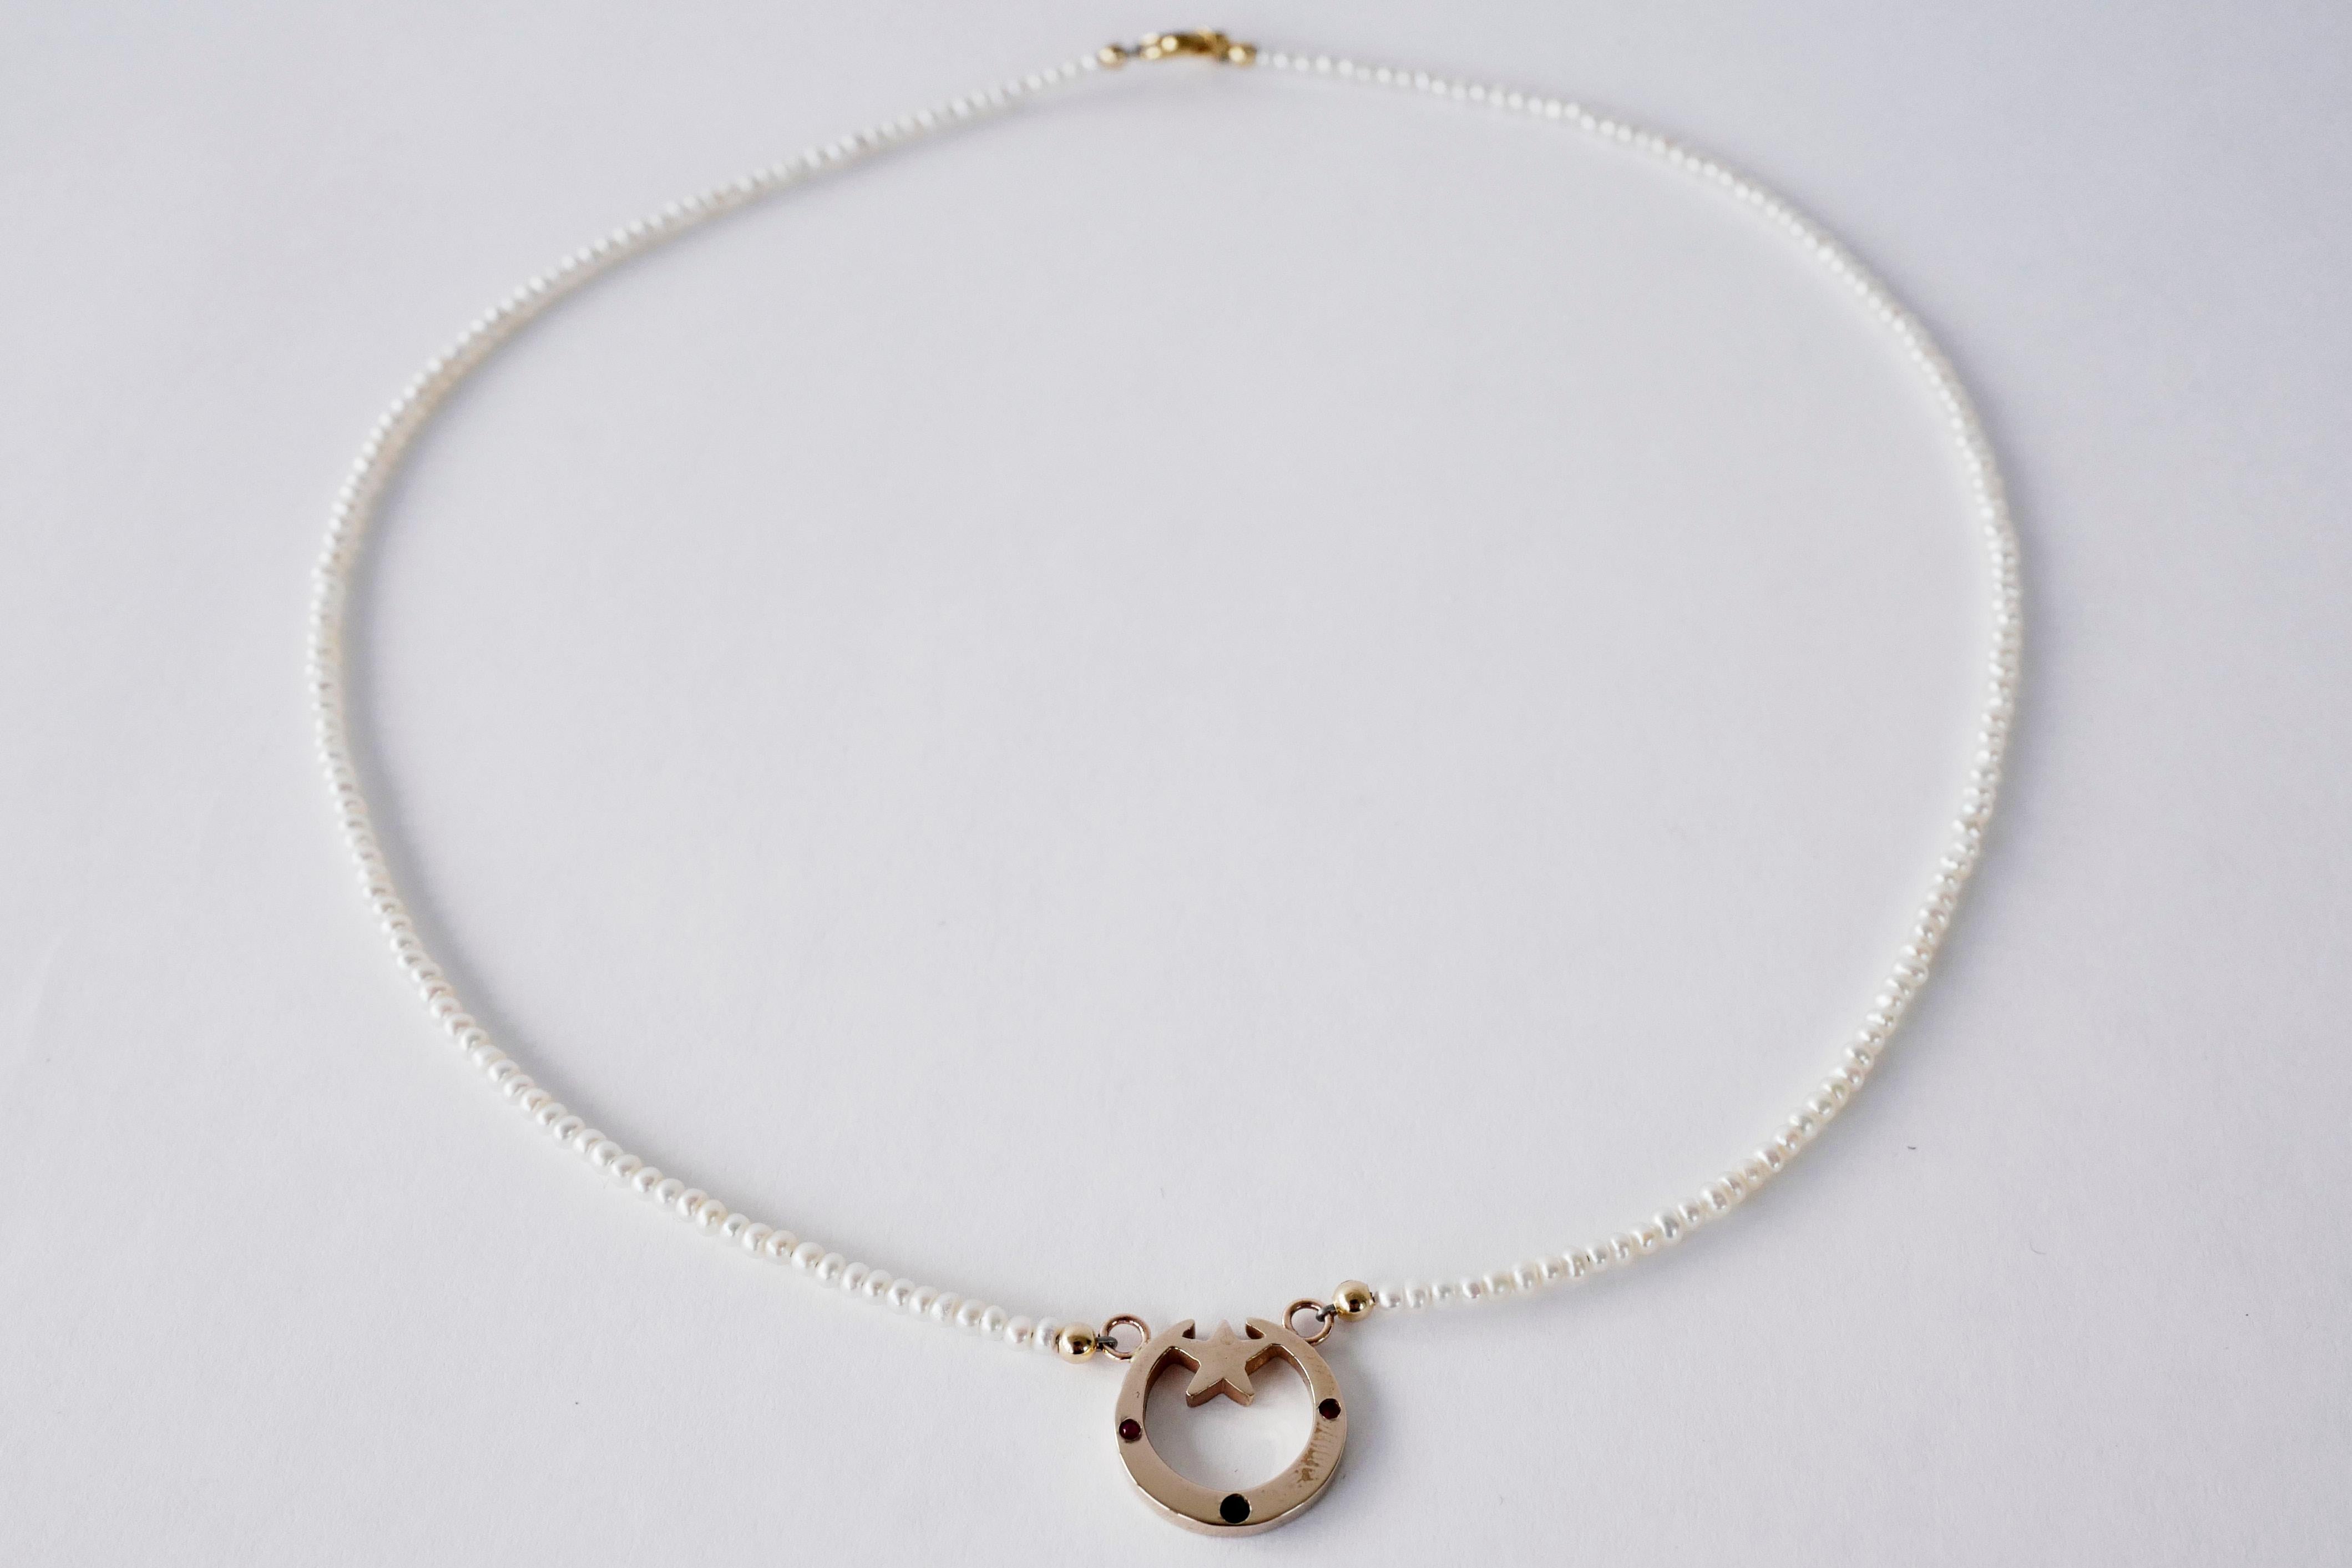 Crescent Moon Necklace White Pearl White Diamond Choker J Dauphin For Sale 2